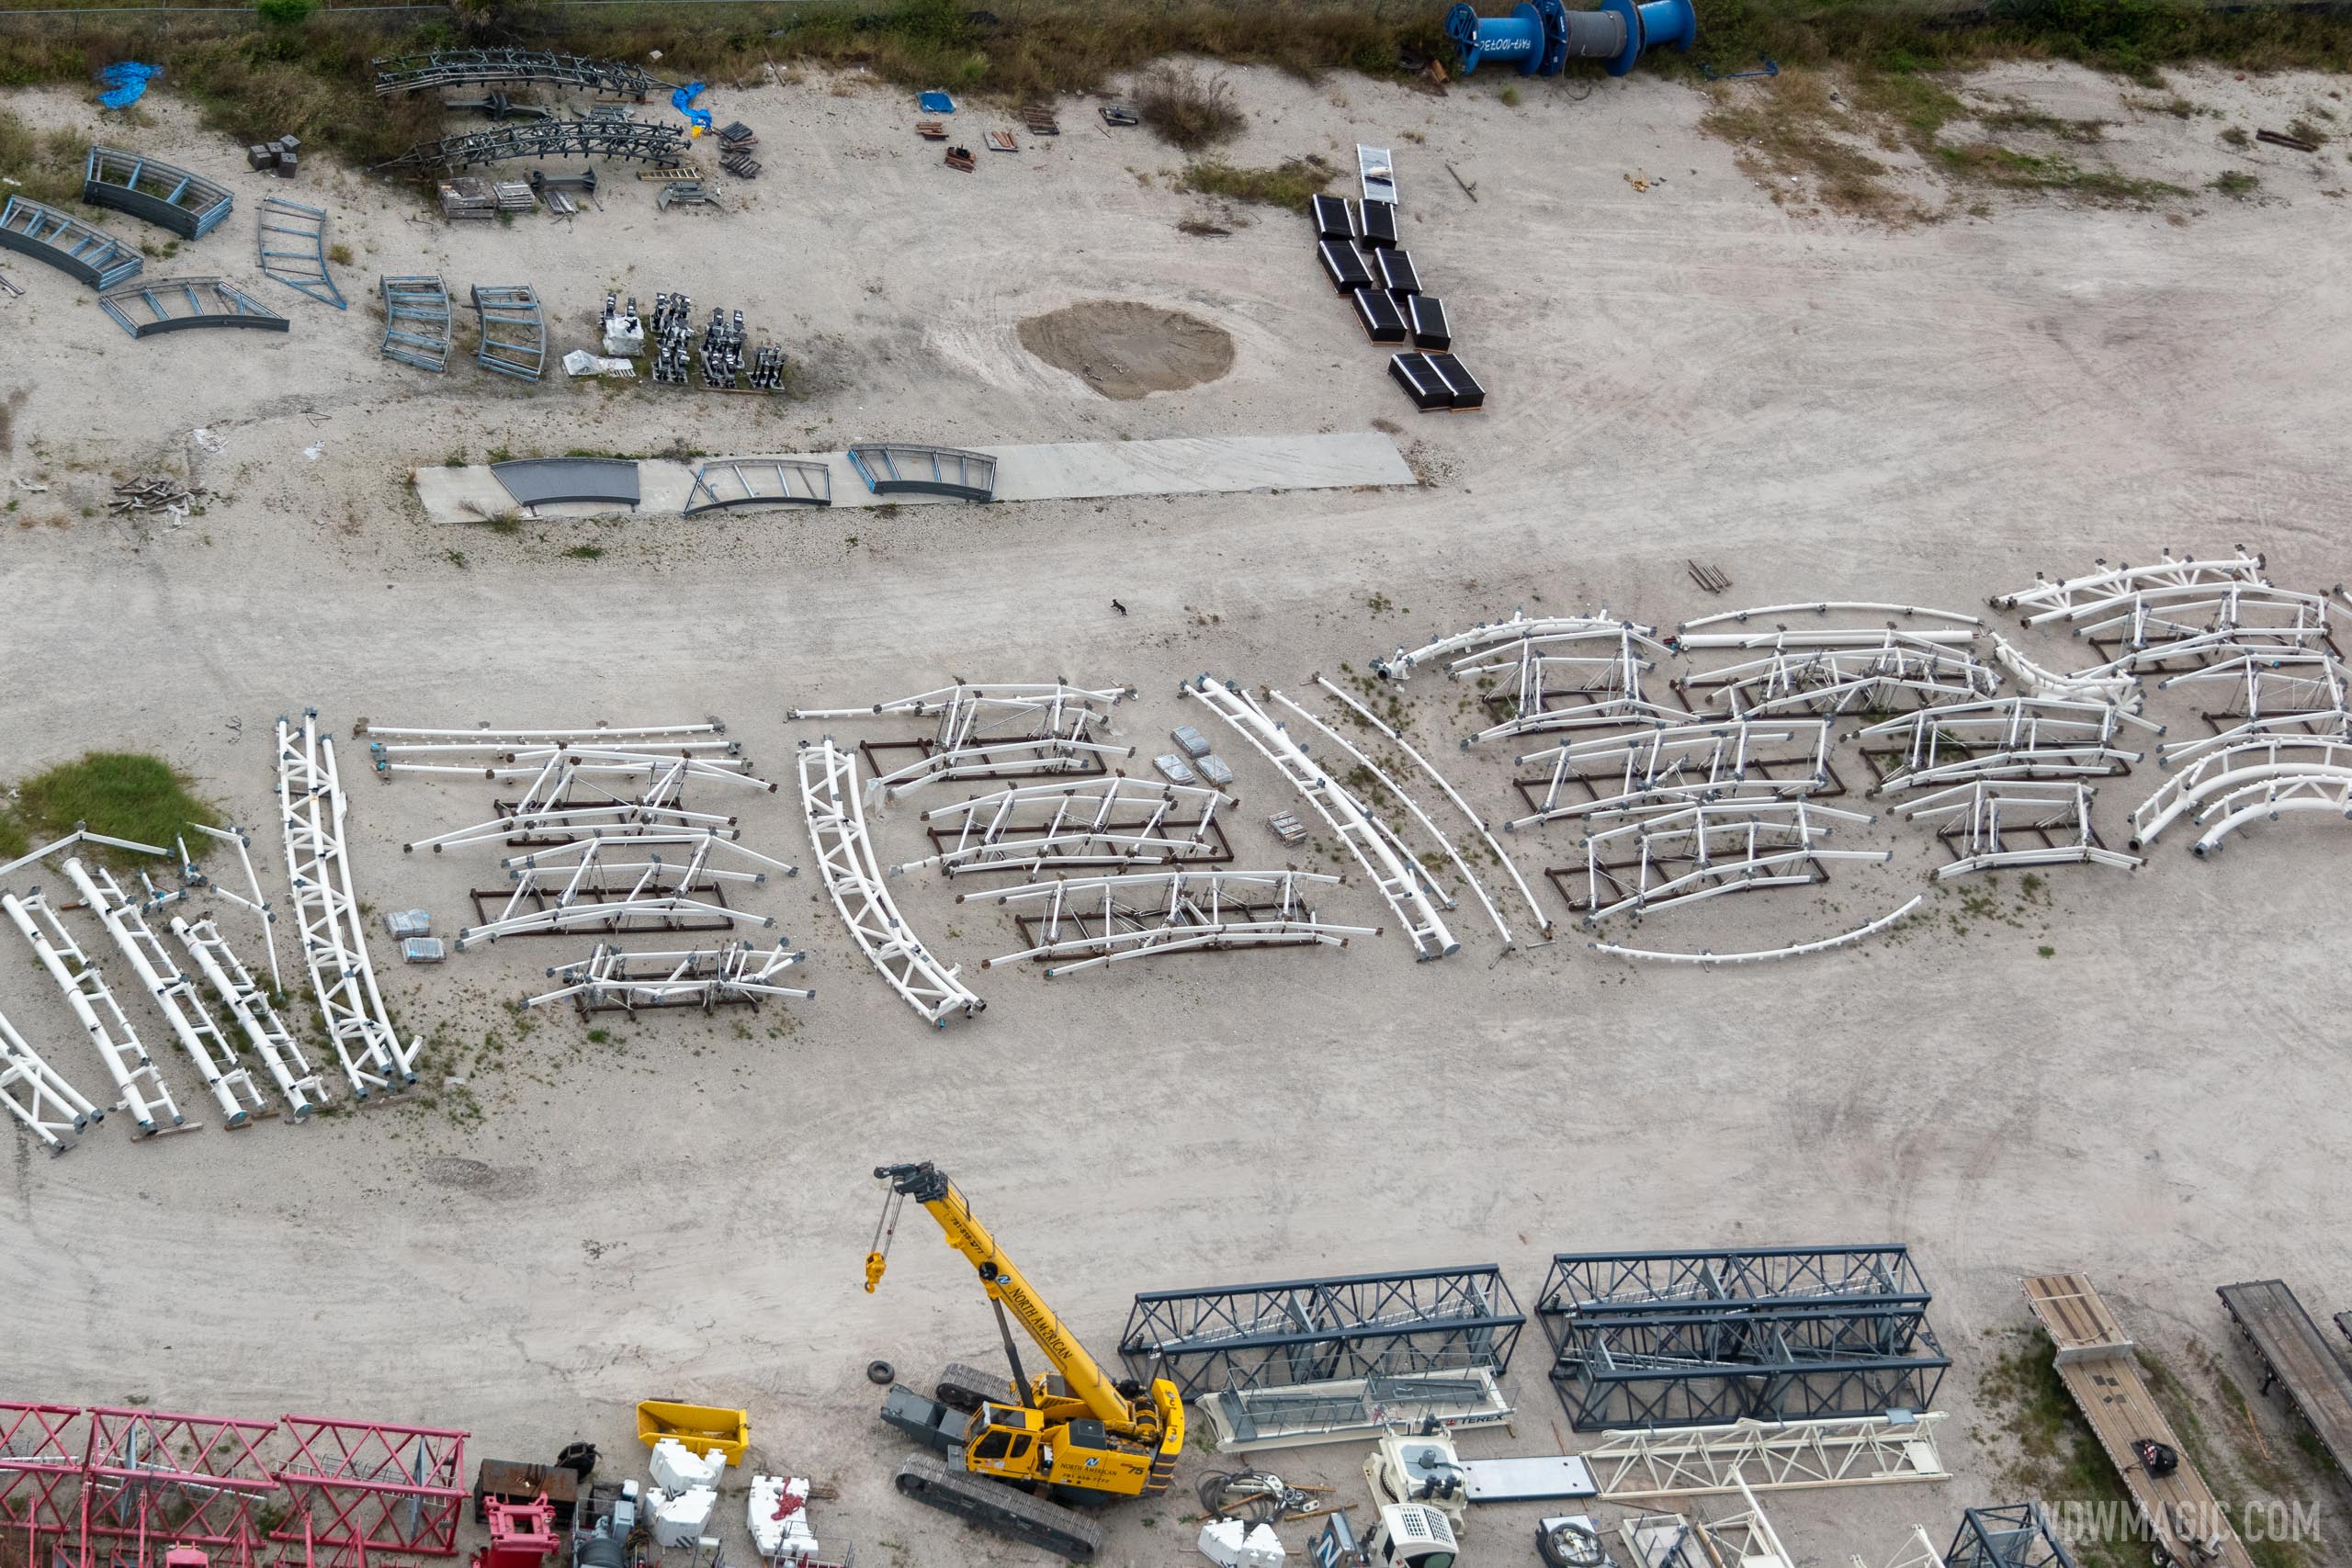 TRON Canopy parts awaiting installation - Aerial photo for WDWMAGIC by @cchard